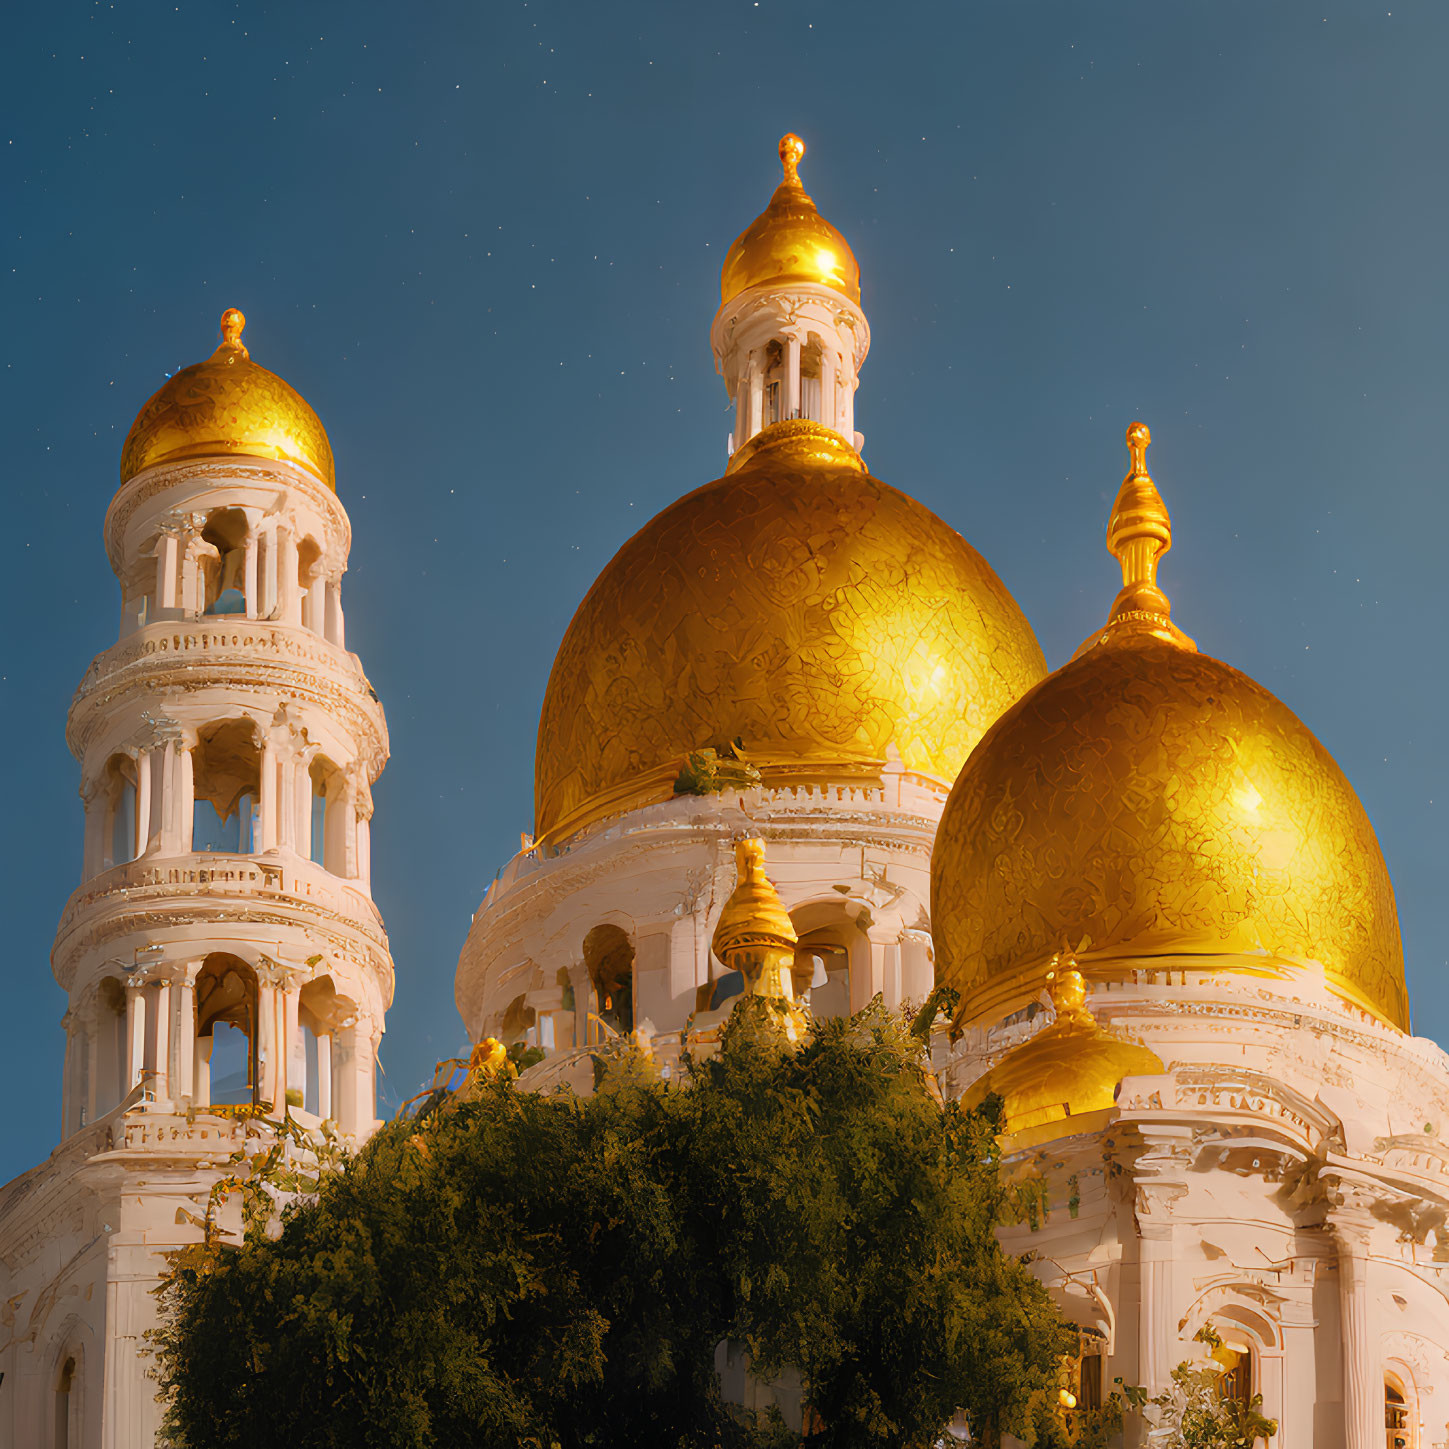 Grand building with illuminated golden domes and white tower under twilight sky.